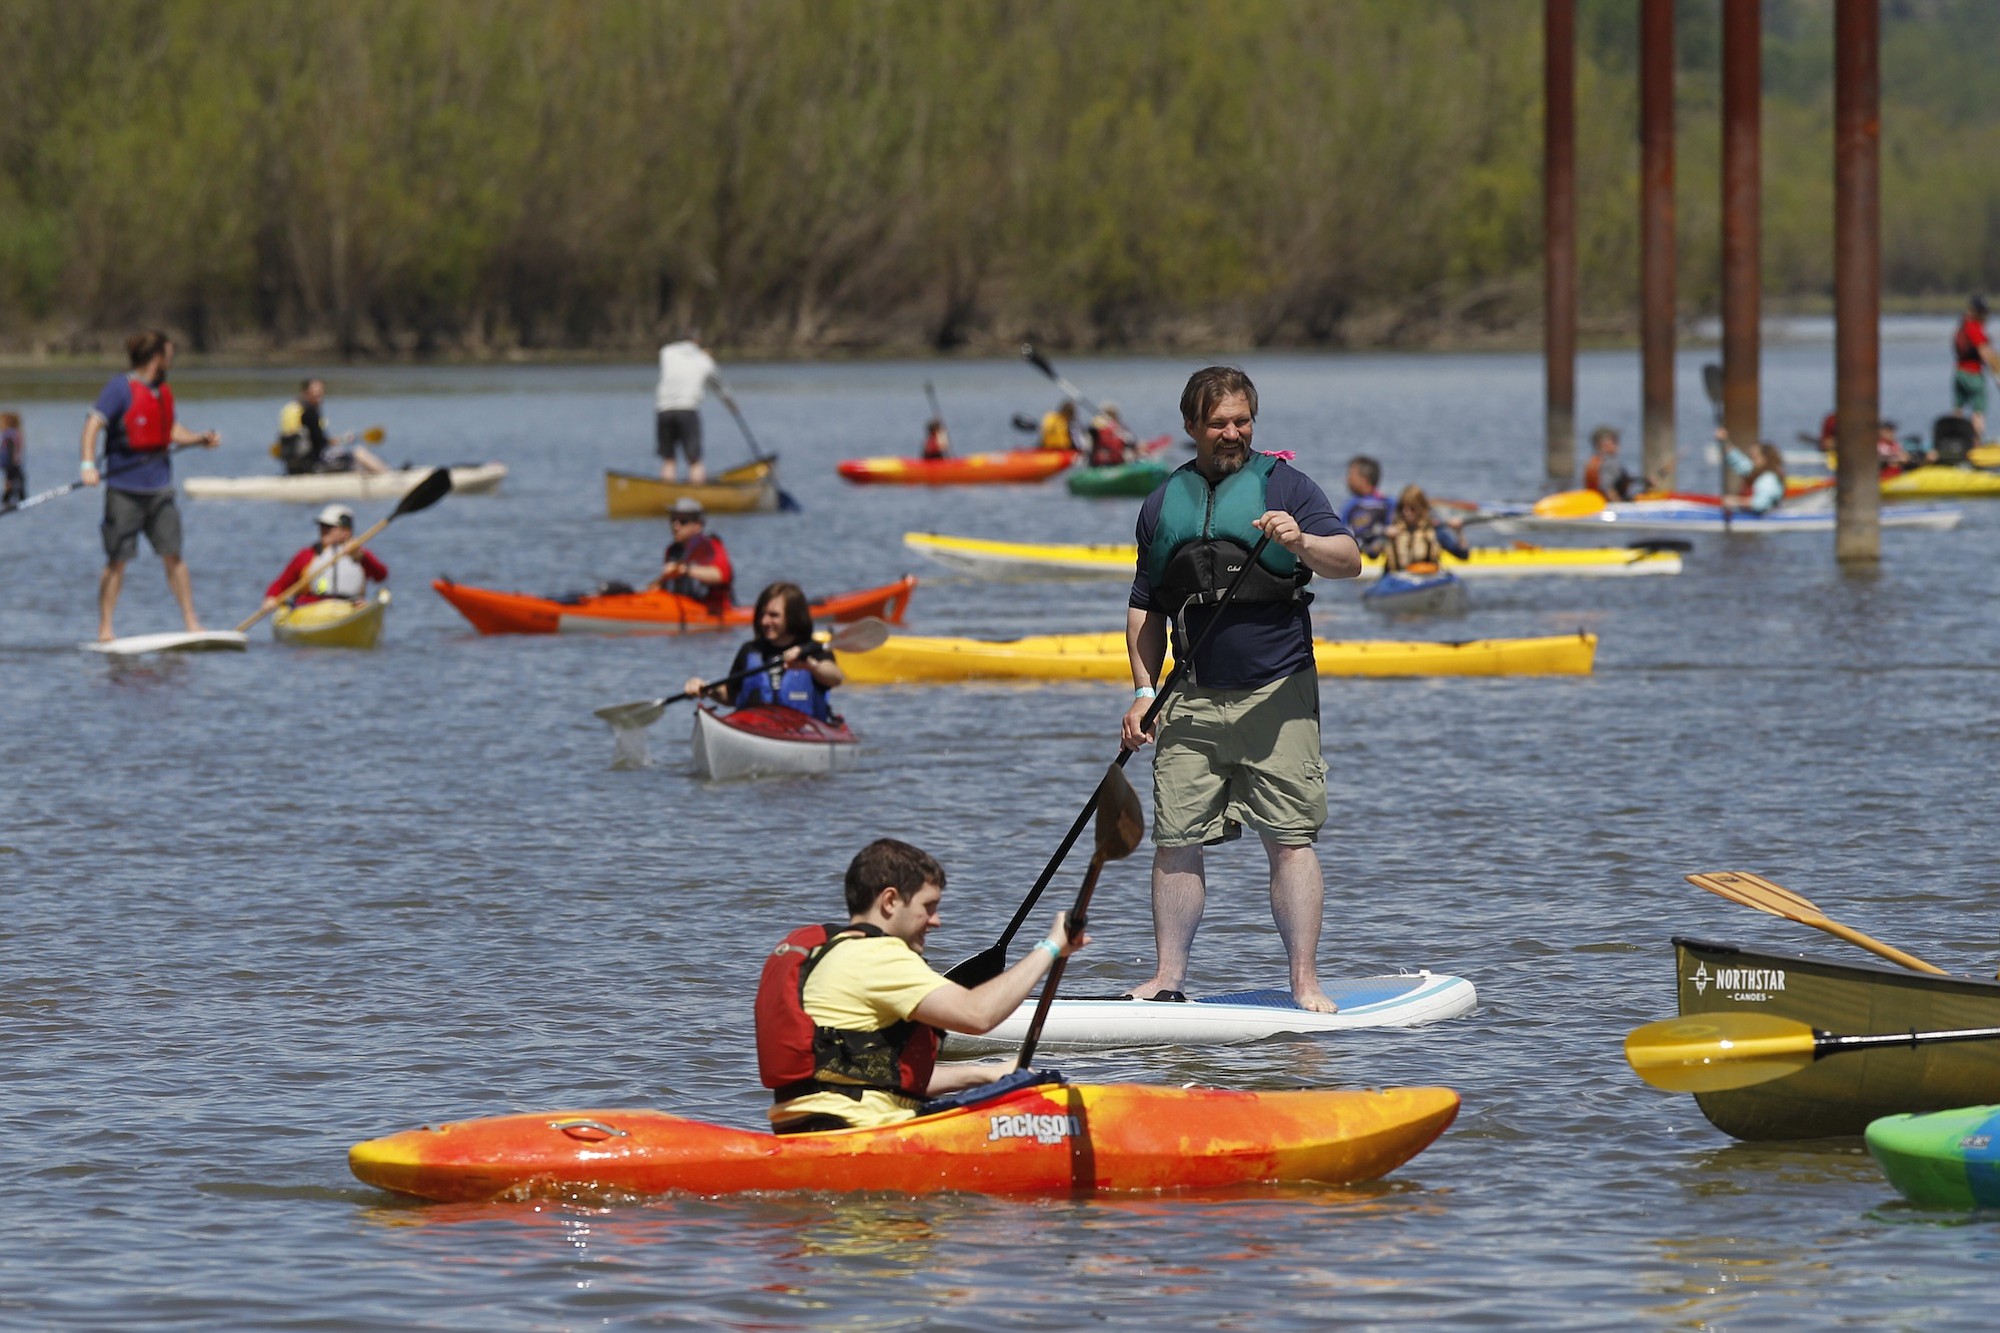 People test out kayaks and stand-up paddle boards during April's Paddlefest at Vancouver Lake Regional Park.